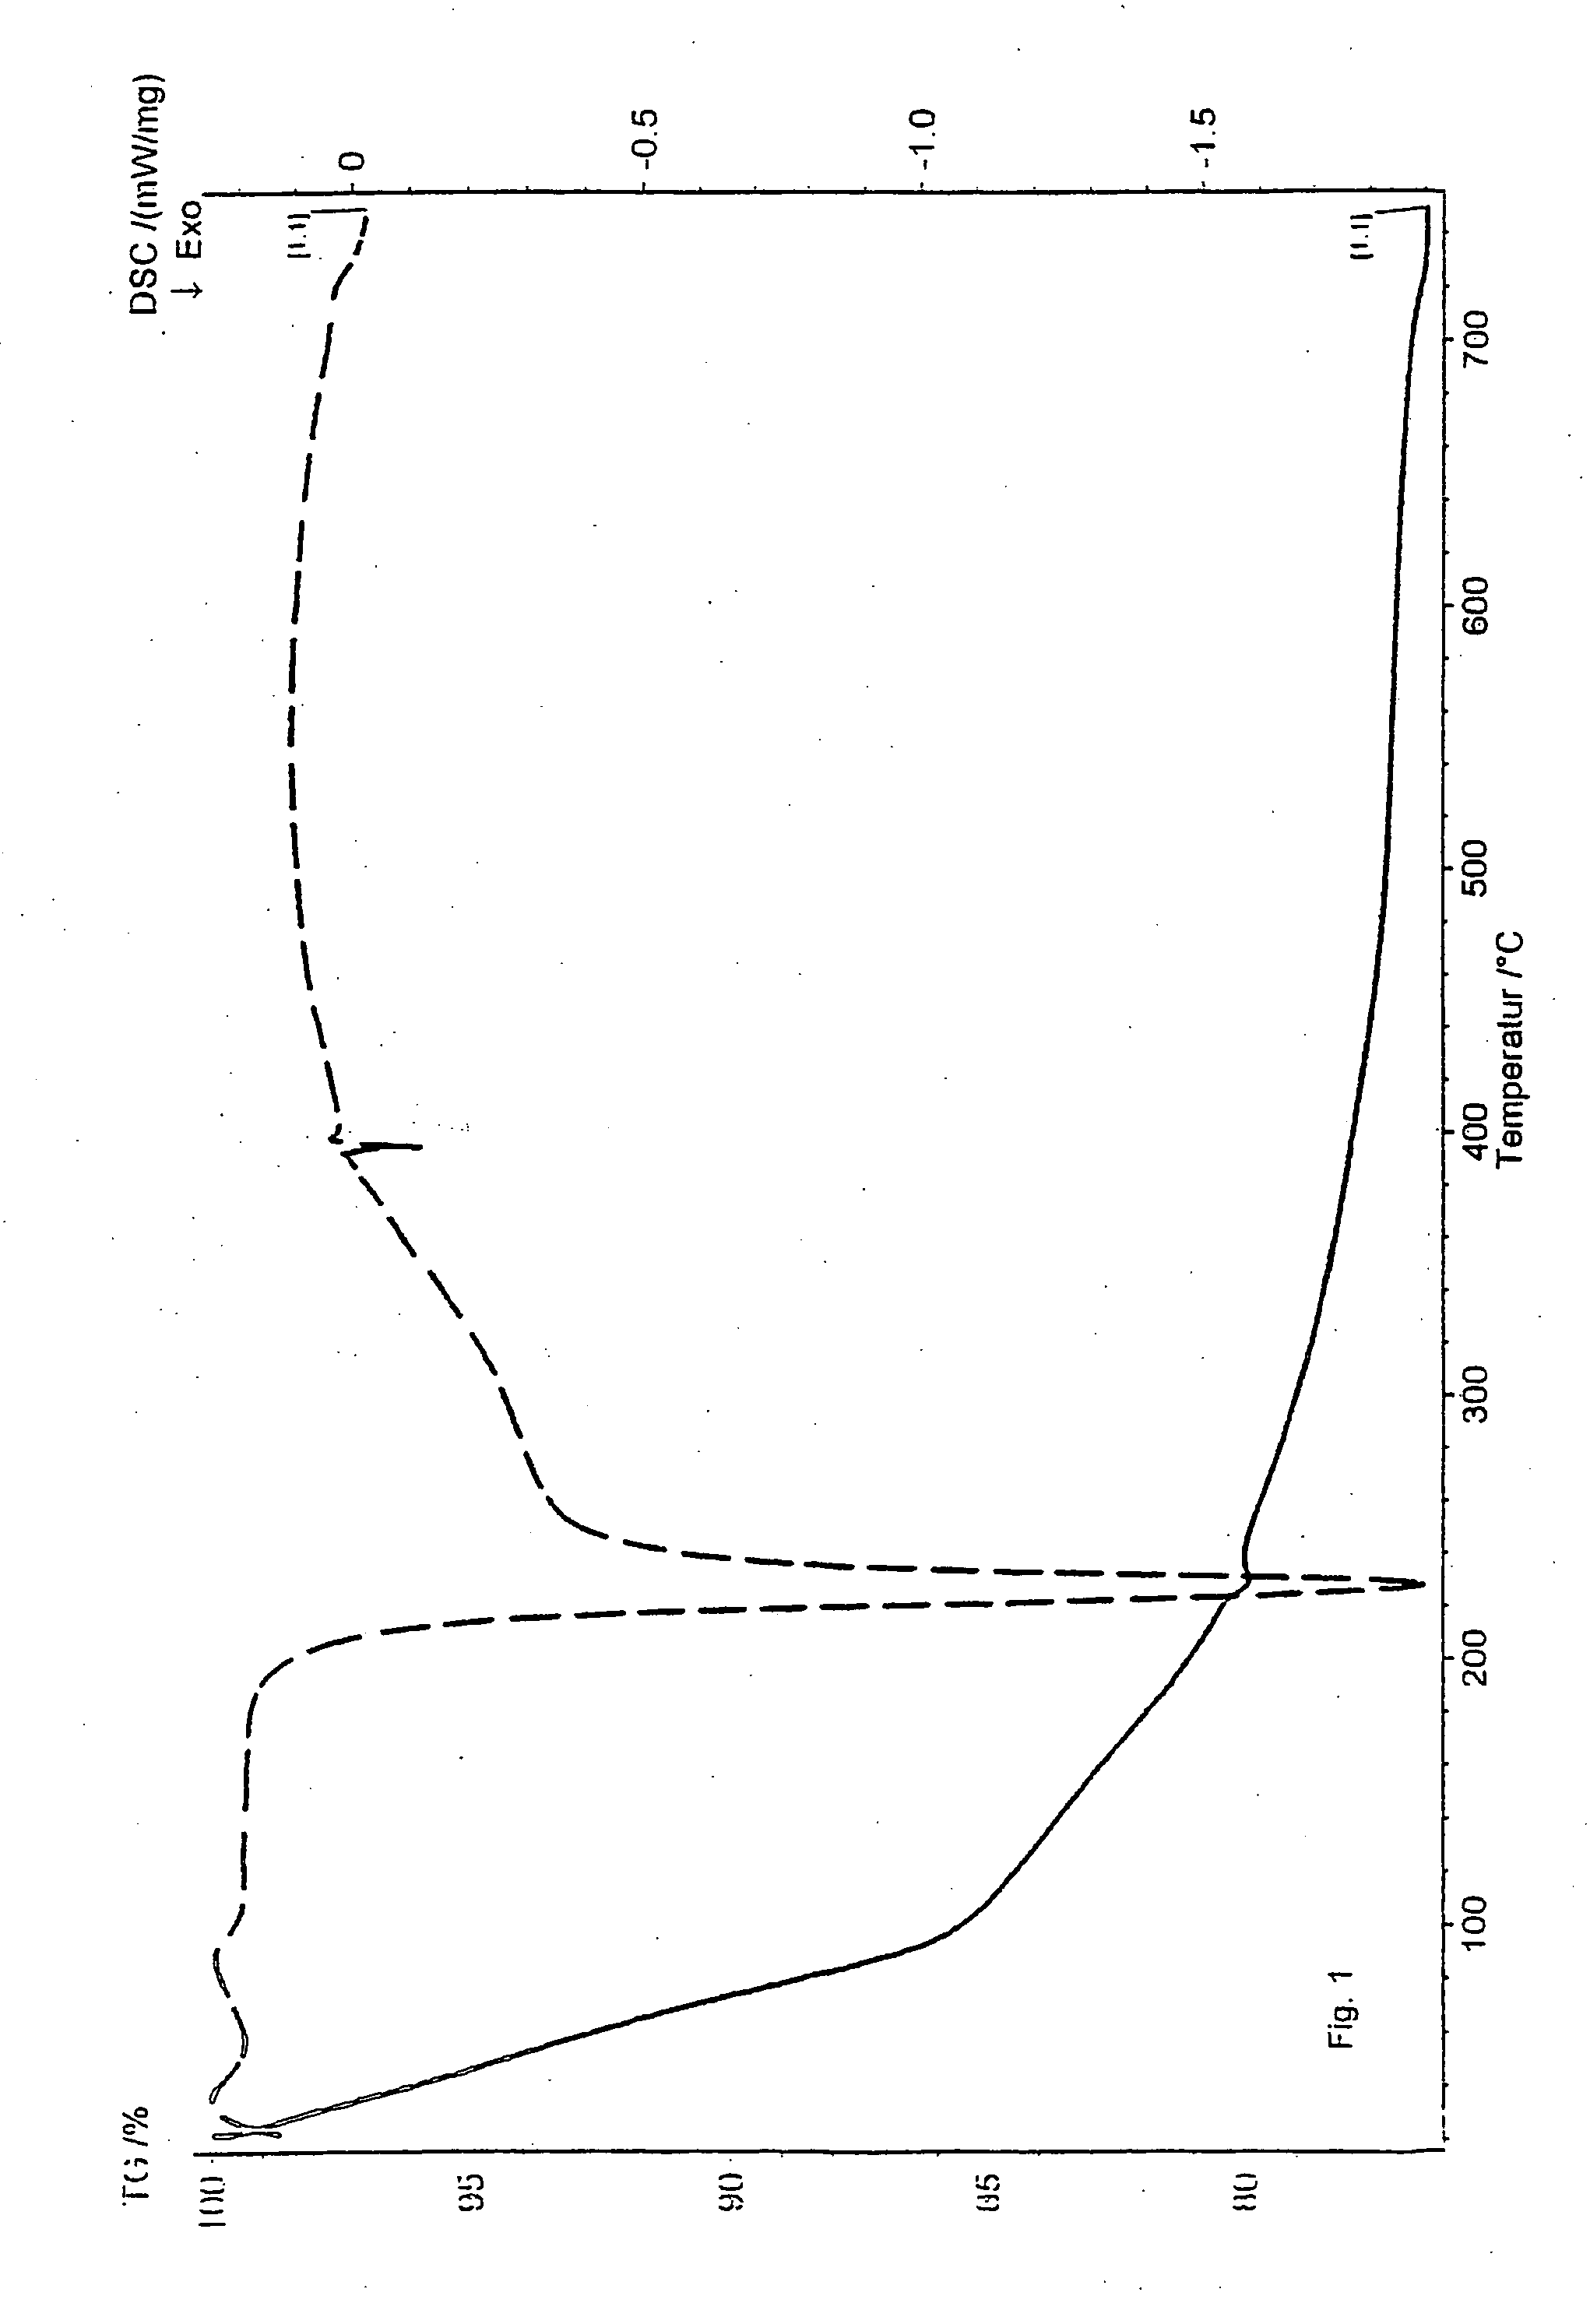 Method for sulfur compounds removal from contaminated gas and liquid streams